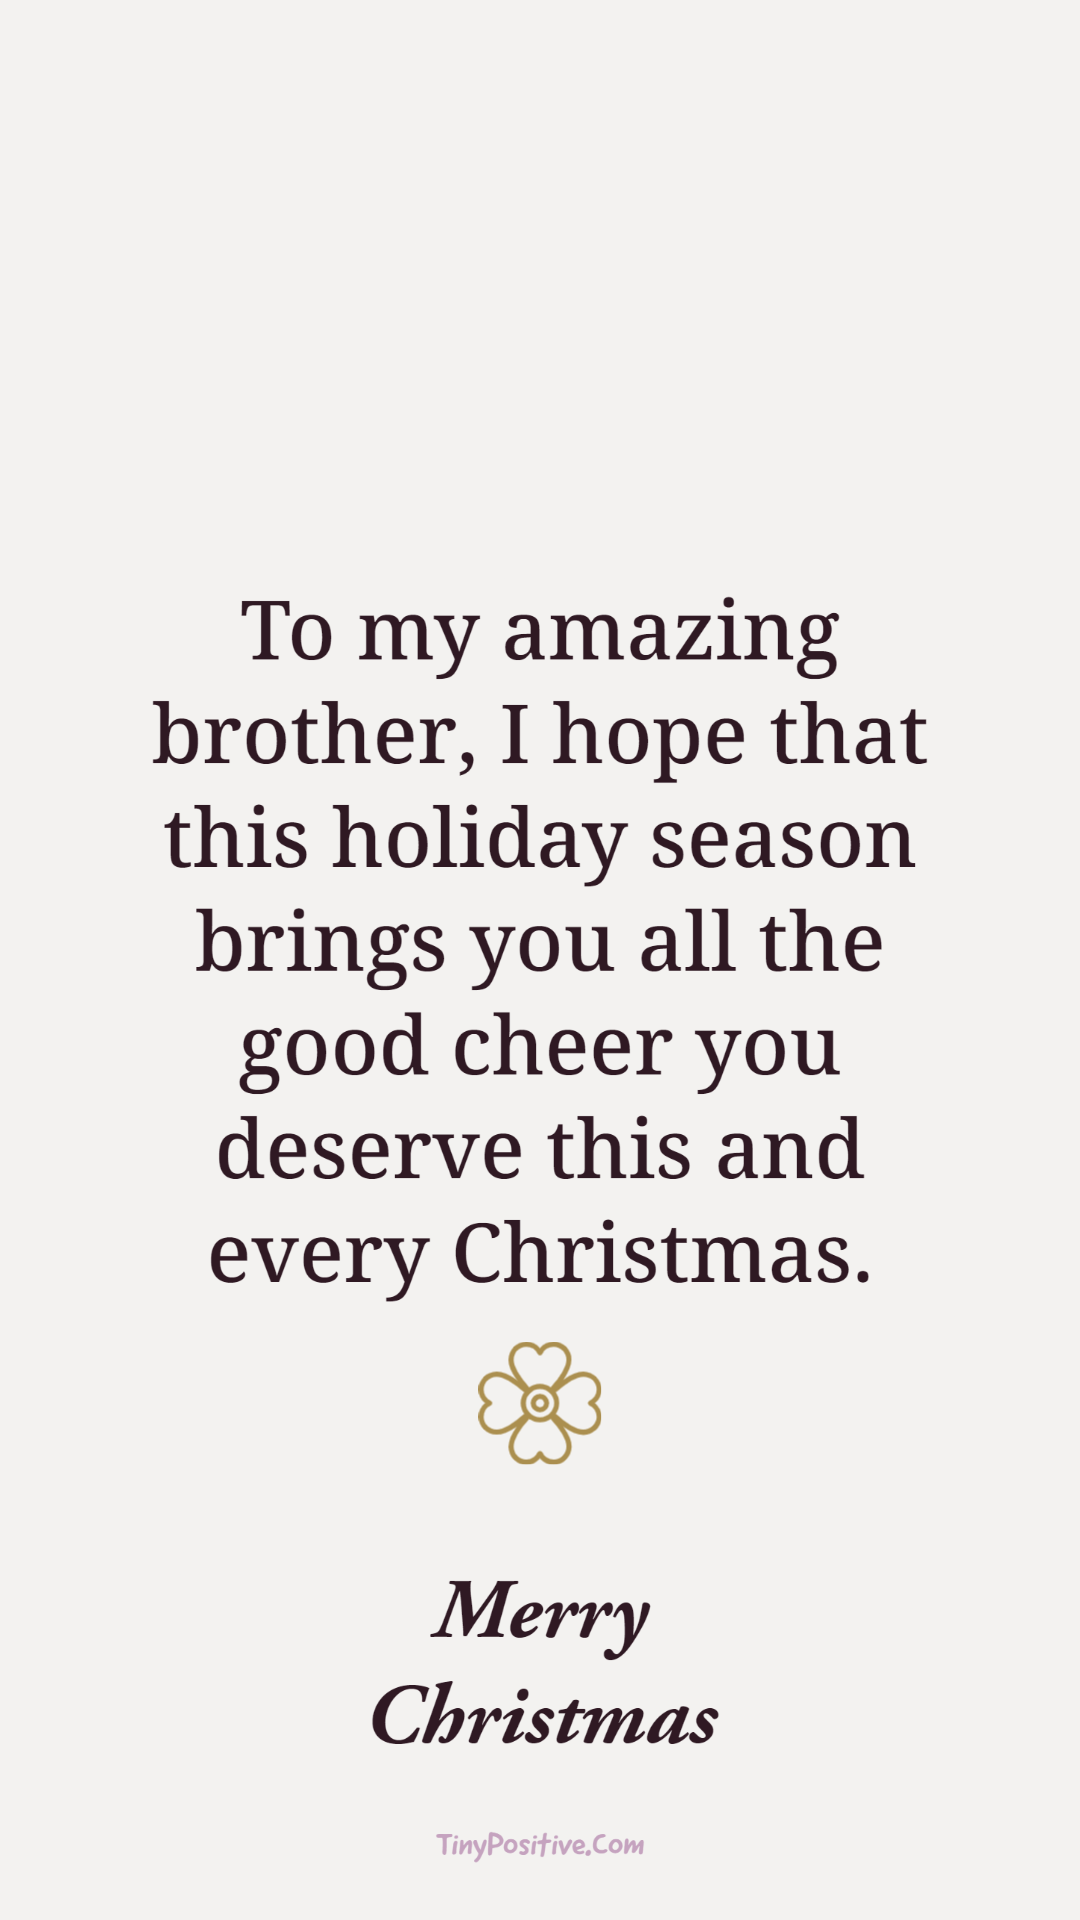 merry christmas wishes for brother quotes messages